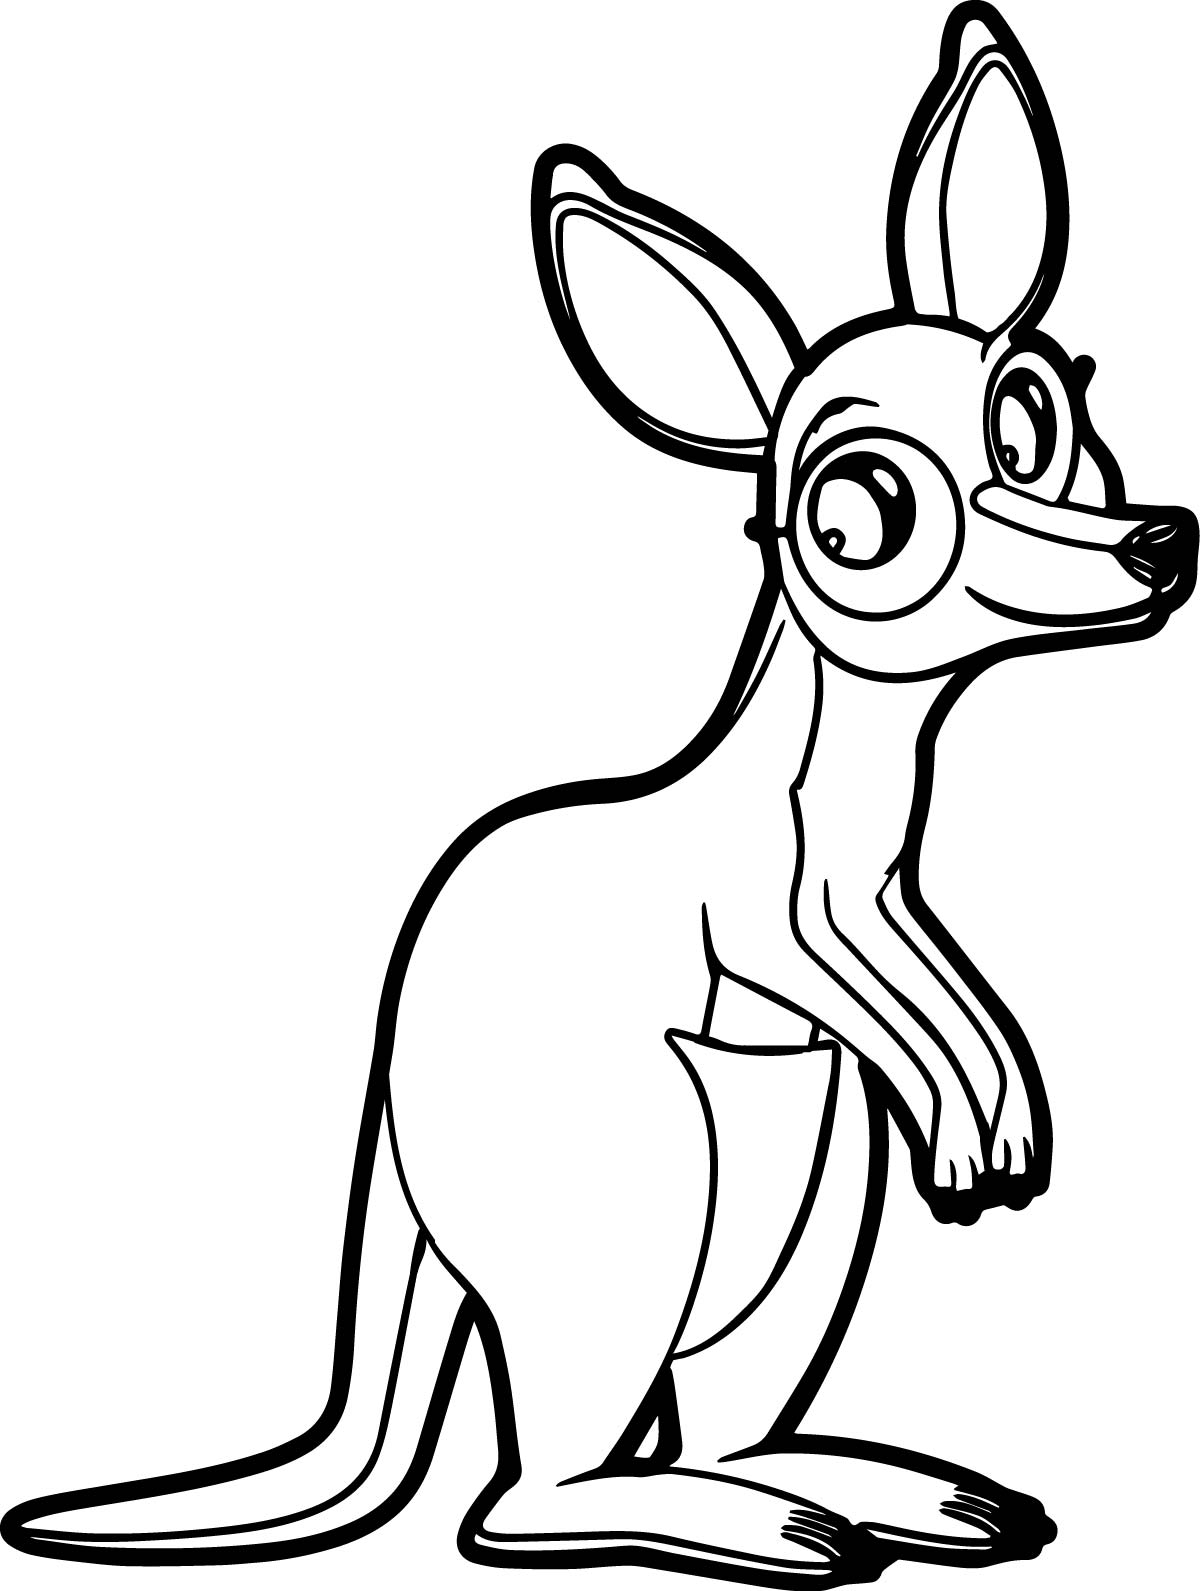 kangaroo-coloring-pages-printable-coloring-pages